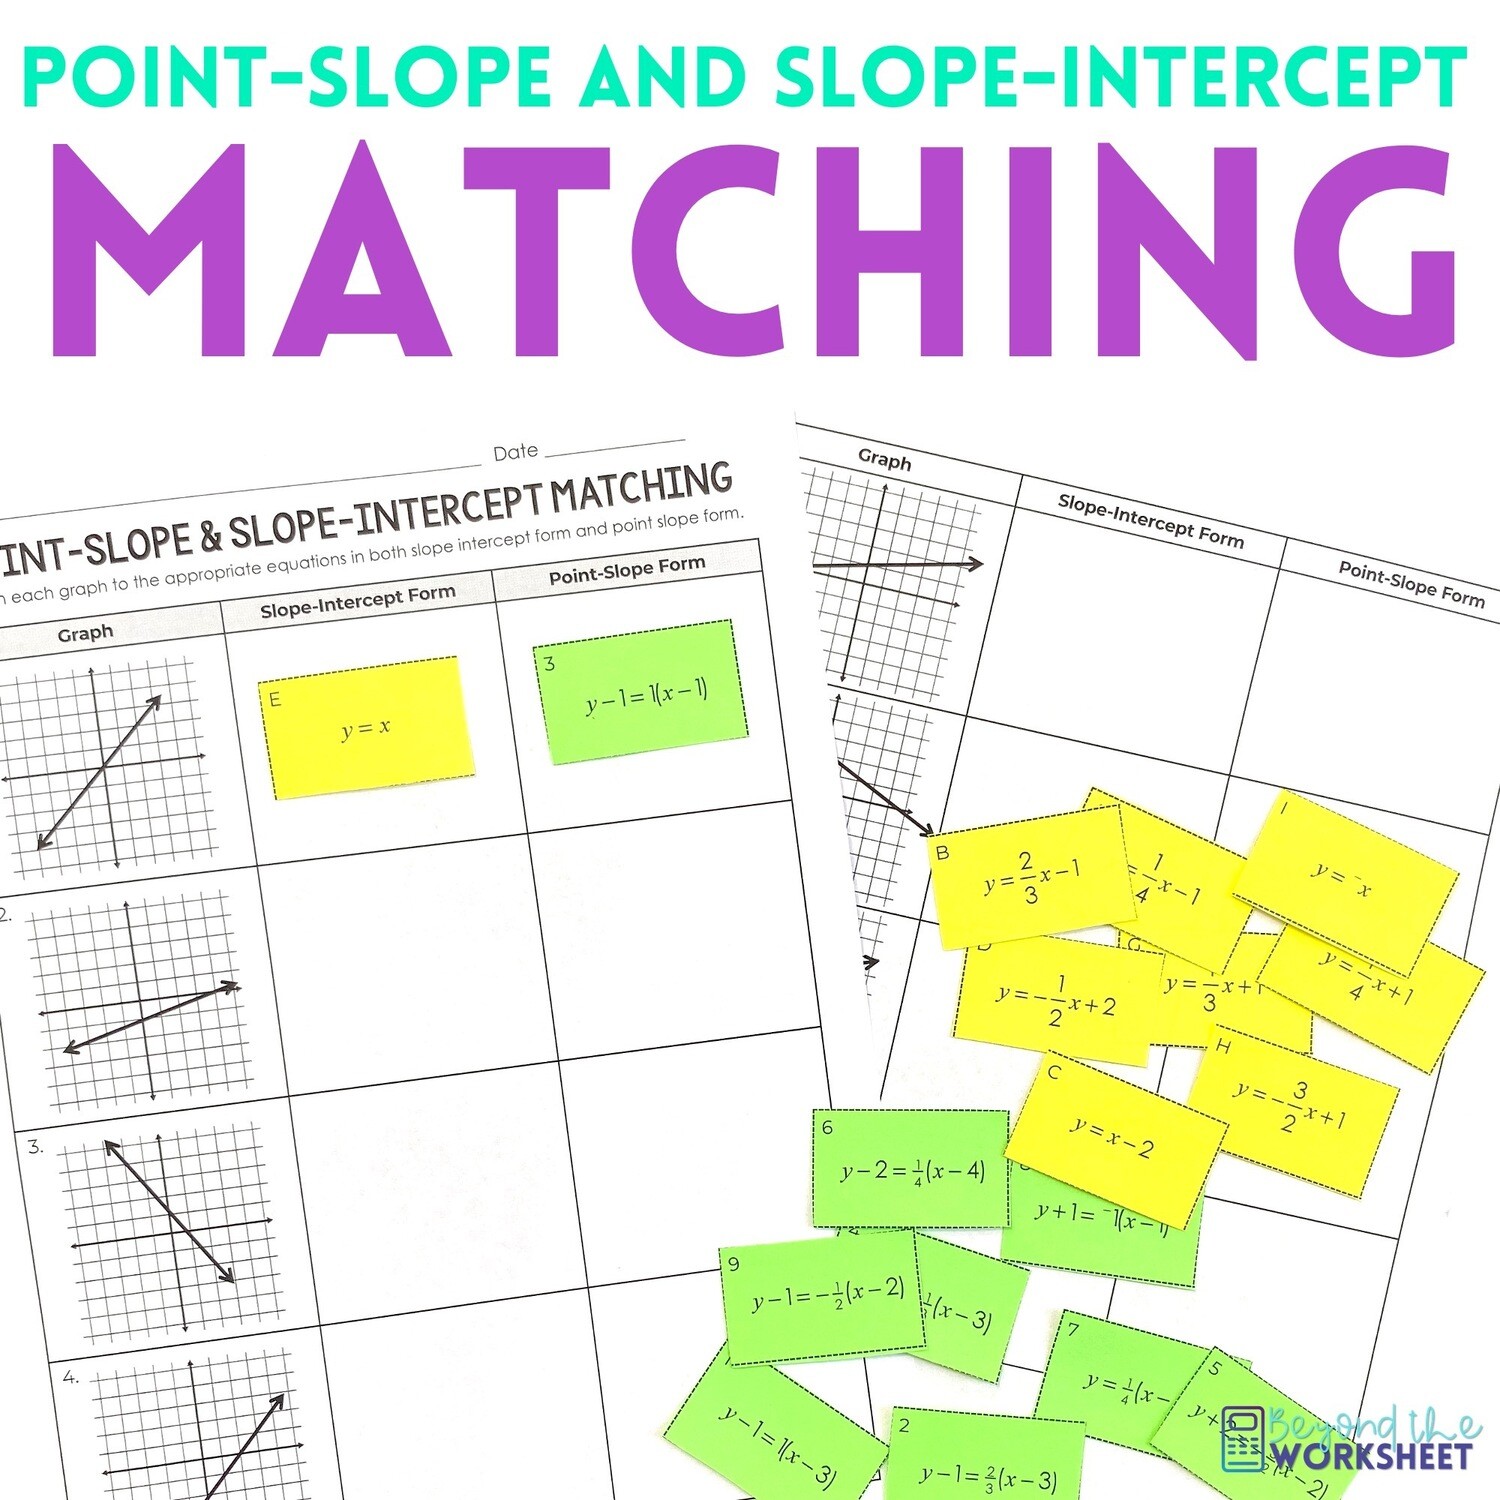 Point-Slope and Slope-Intercept Form Activity